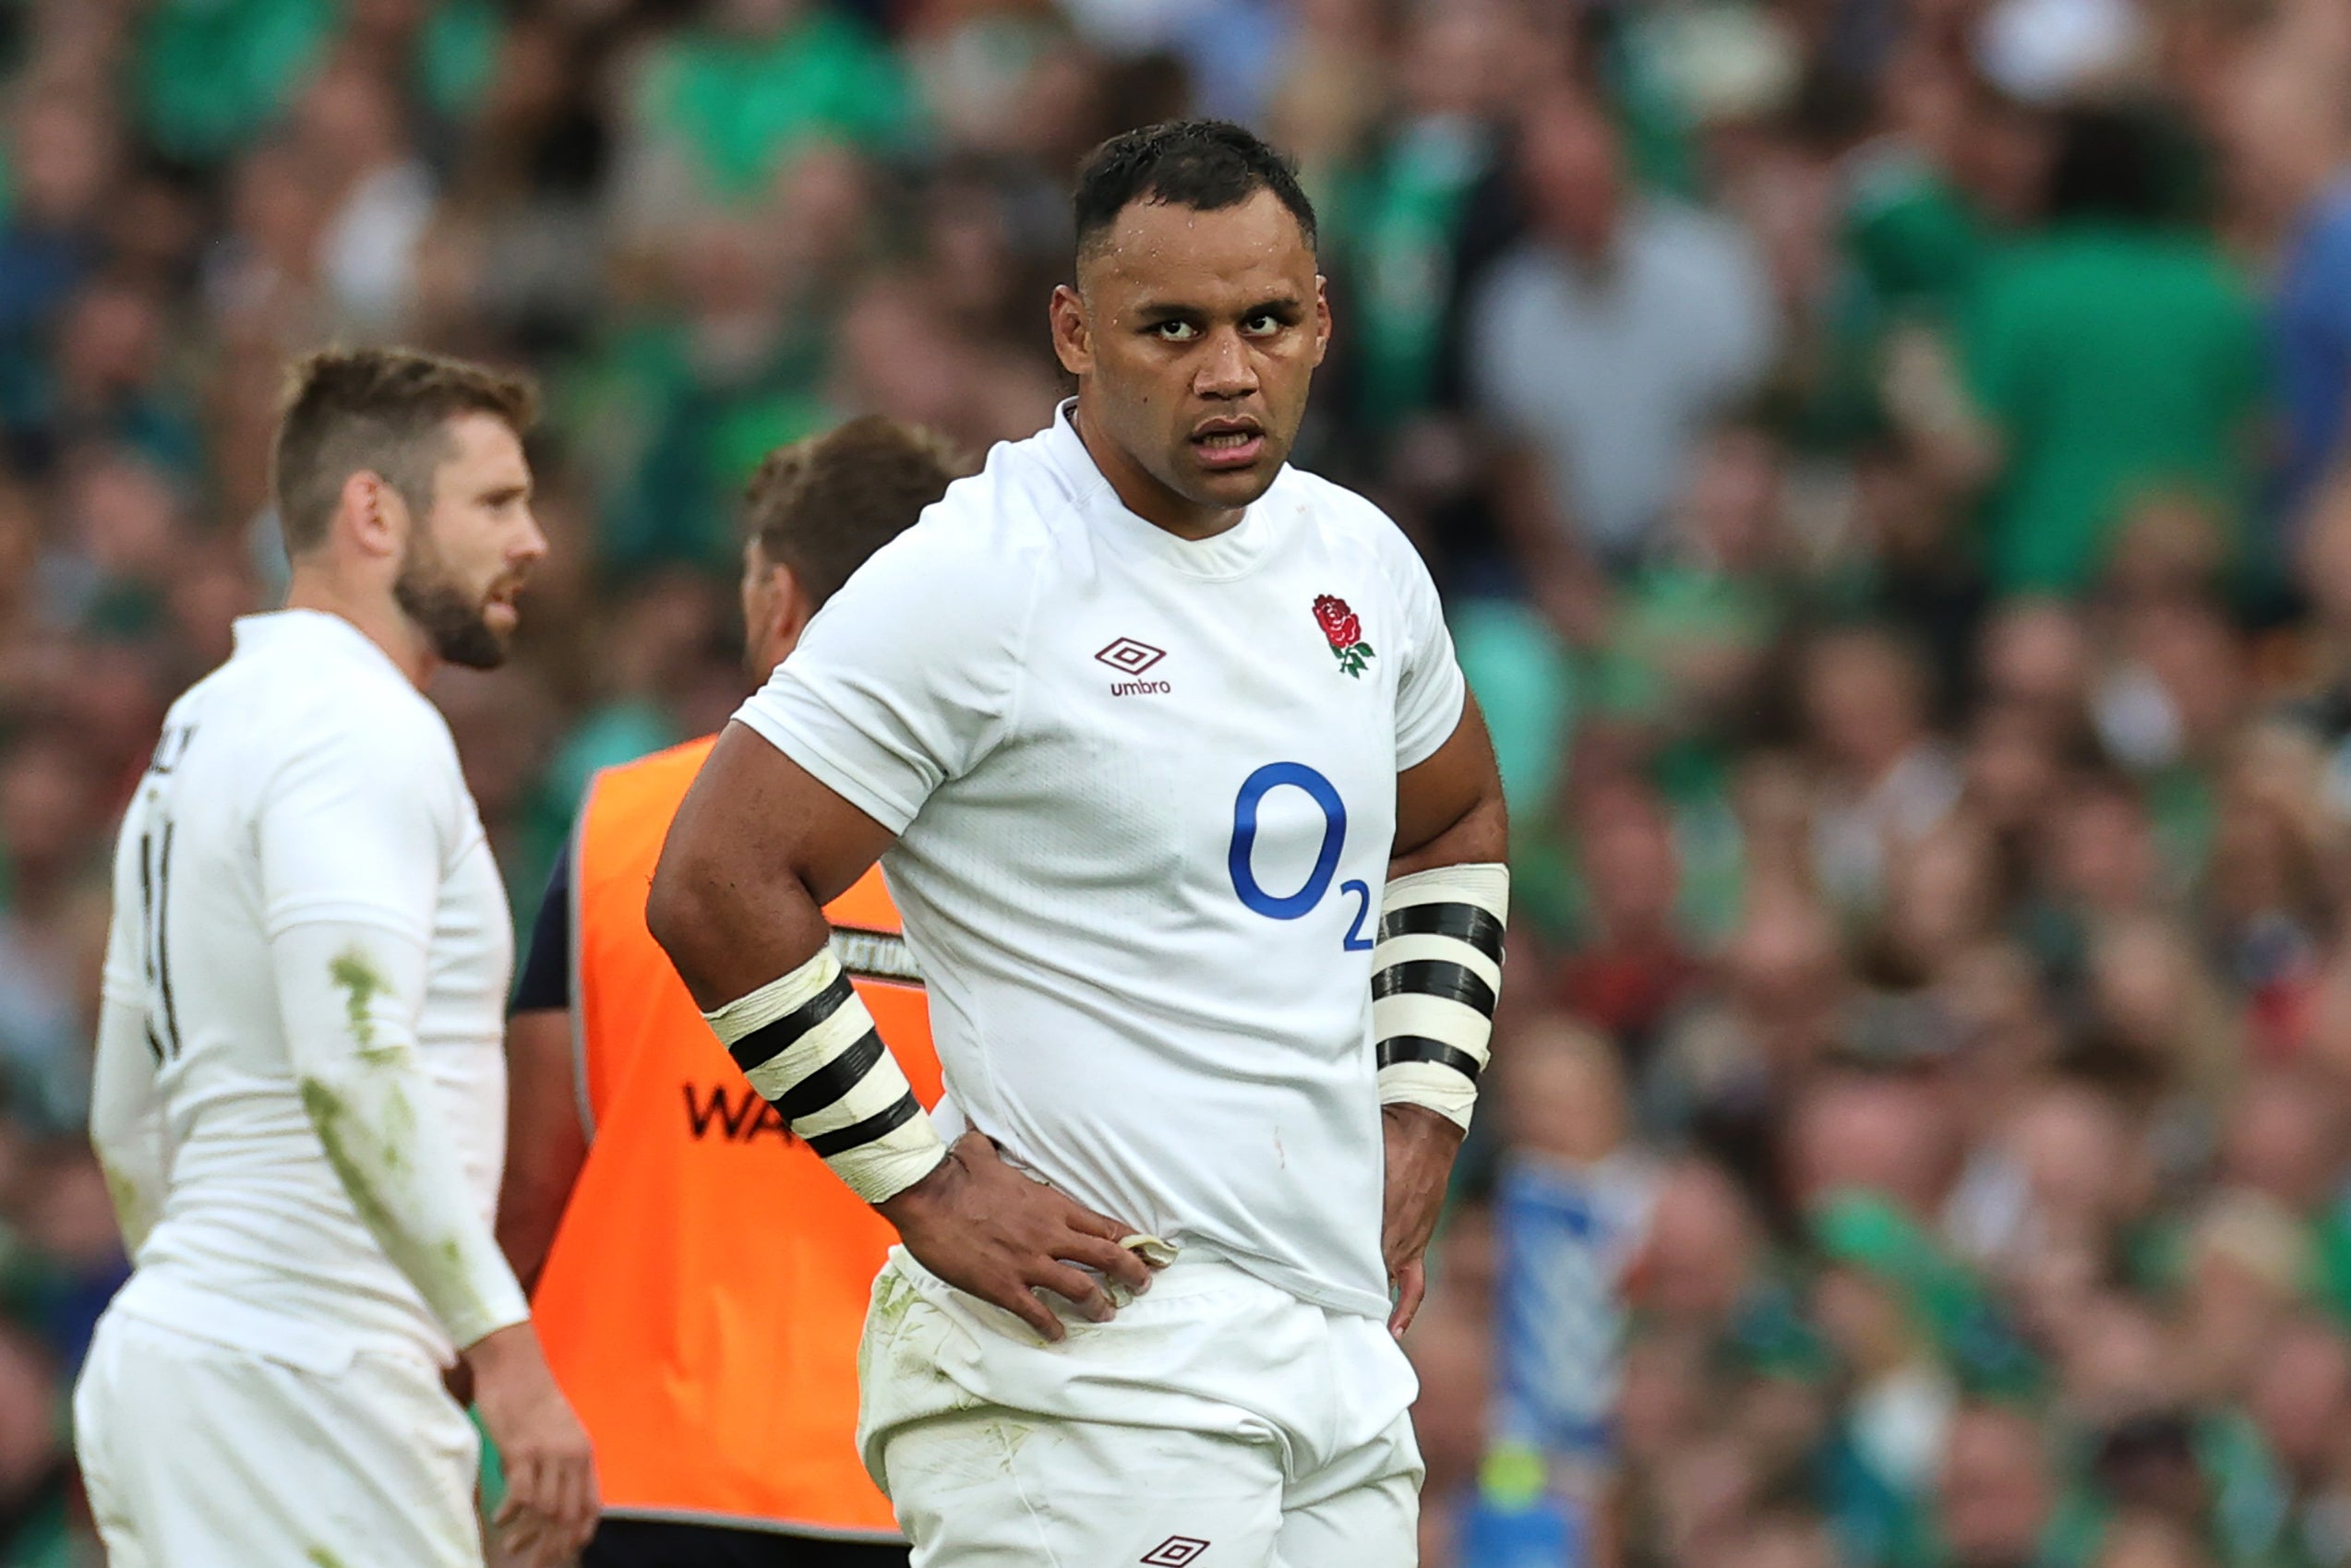 Billy Vunipola was sent off in England’s warm-up game against Ireland